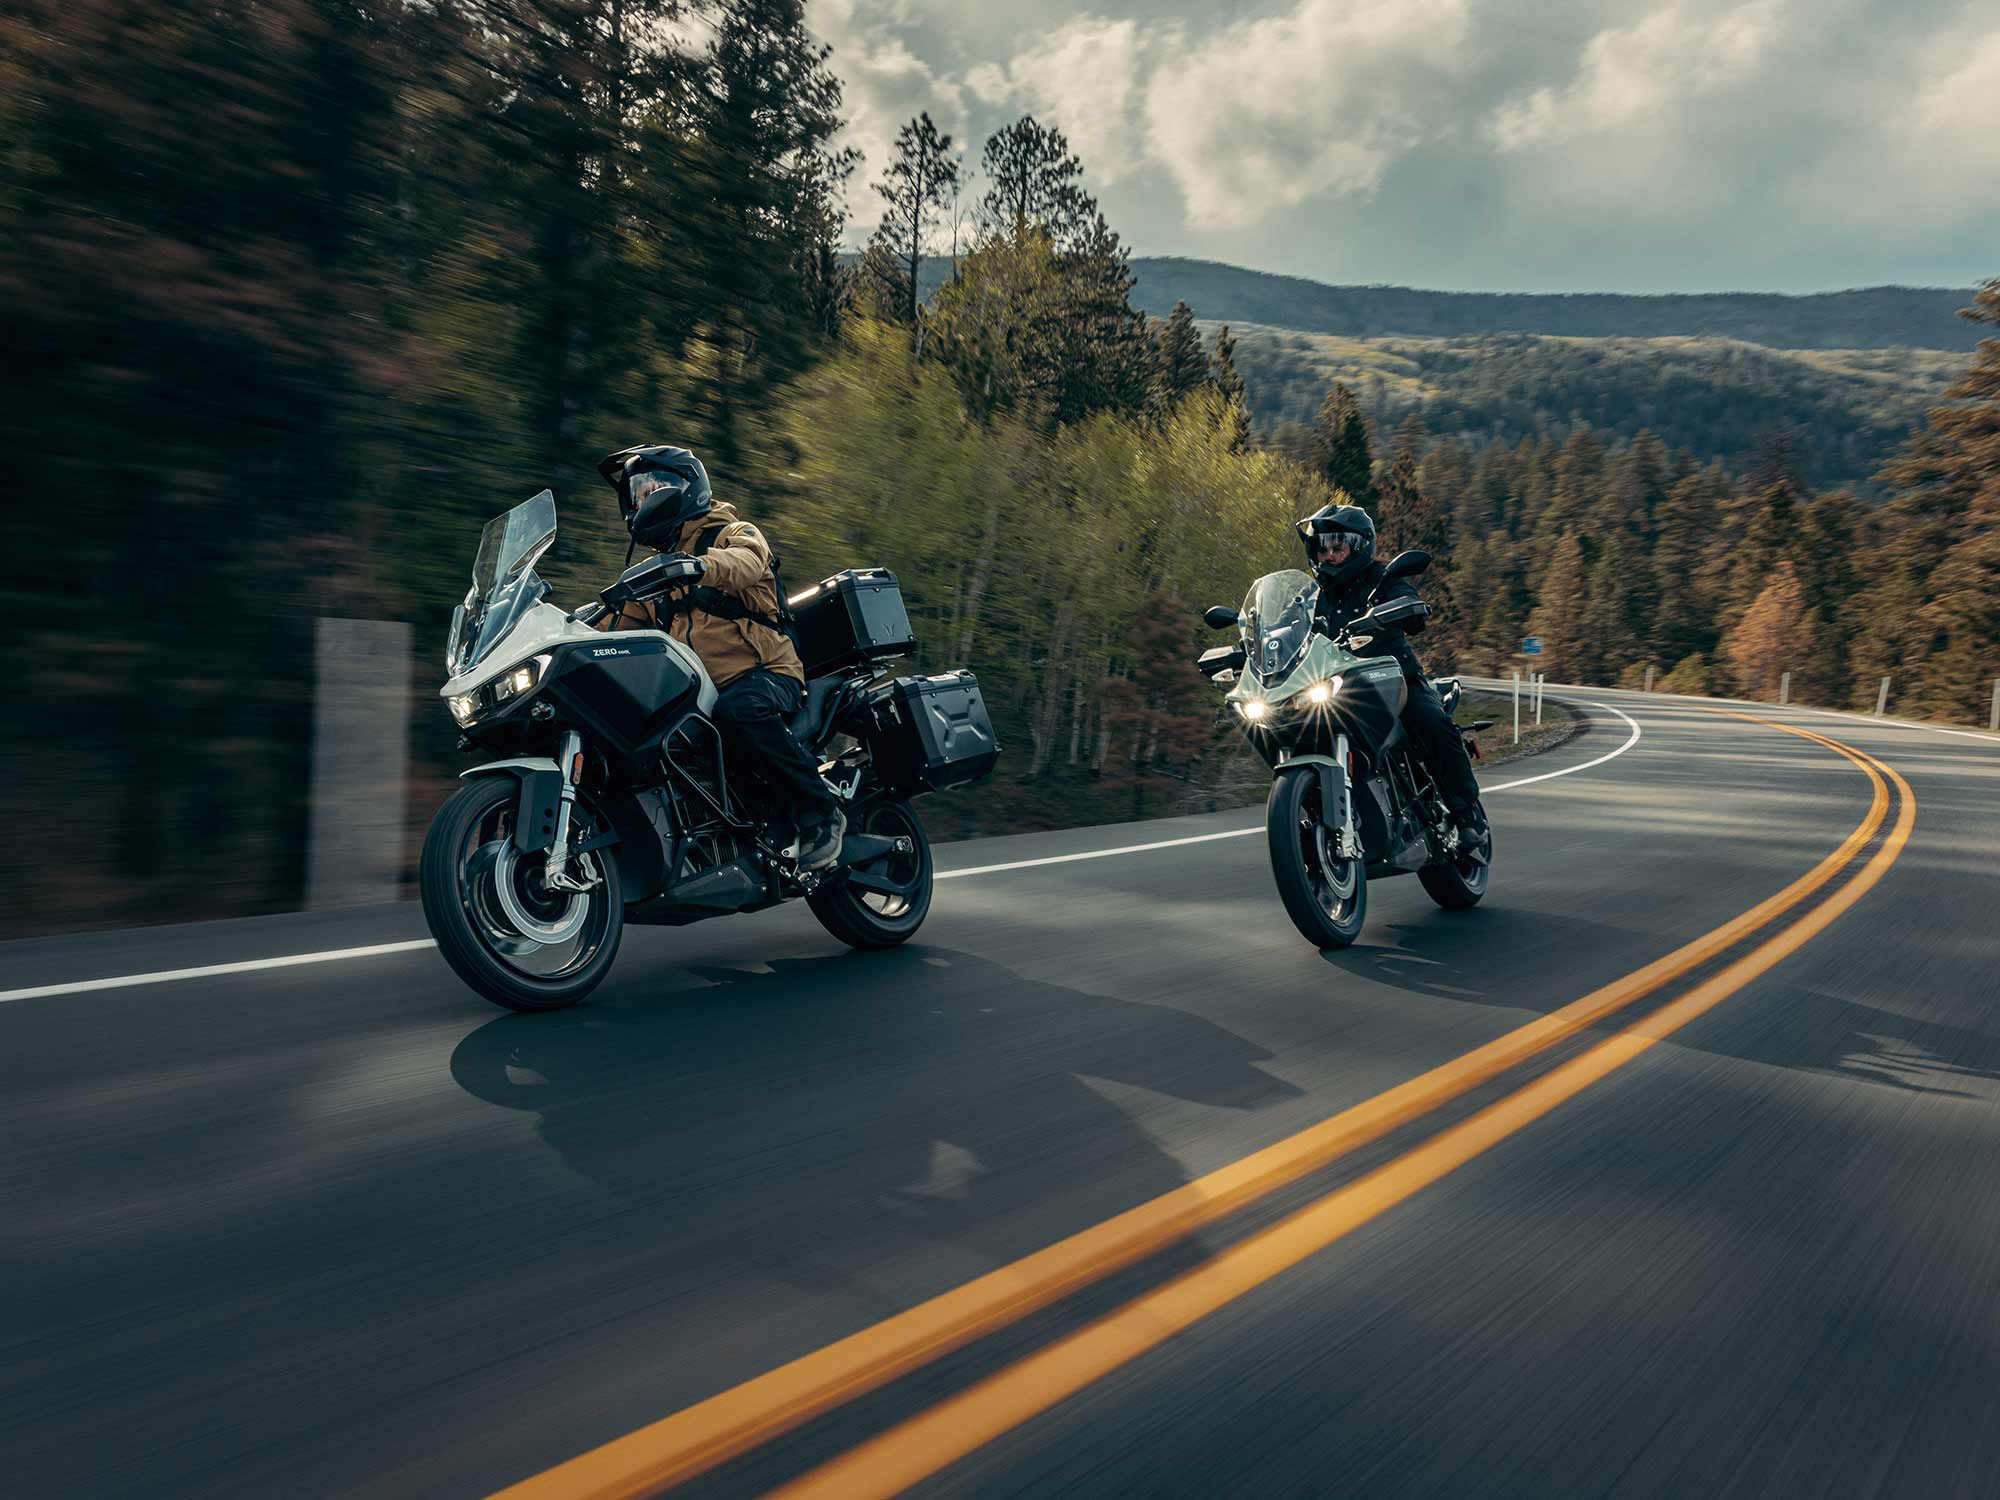 “Our owners and advocates have been asking for a full-sized ADV bike from Zero for years,” Zero Motorcycles CTO Abe Askenazi said. “We invested over 100,000 engineering hours into designing a motorcycle that lives up to both our customers’ expectations and Zero’s mission to redefine the riding experience.”